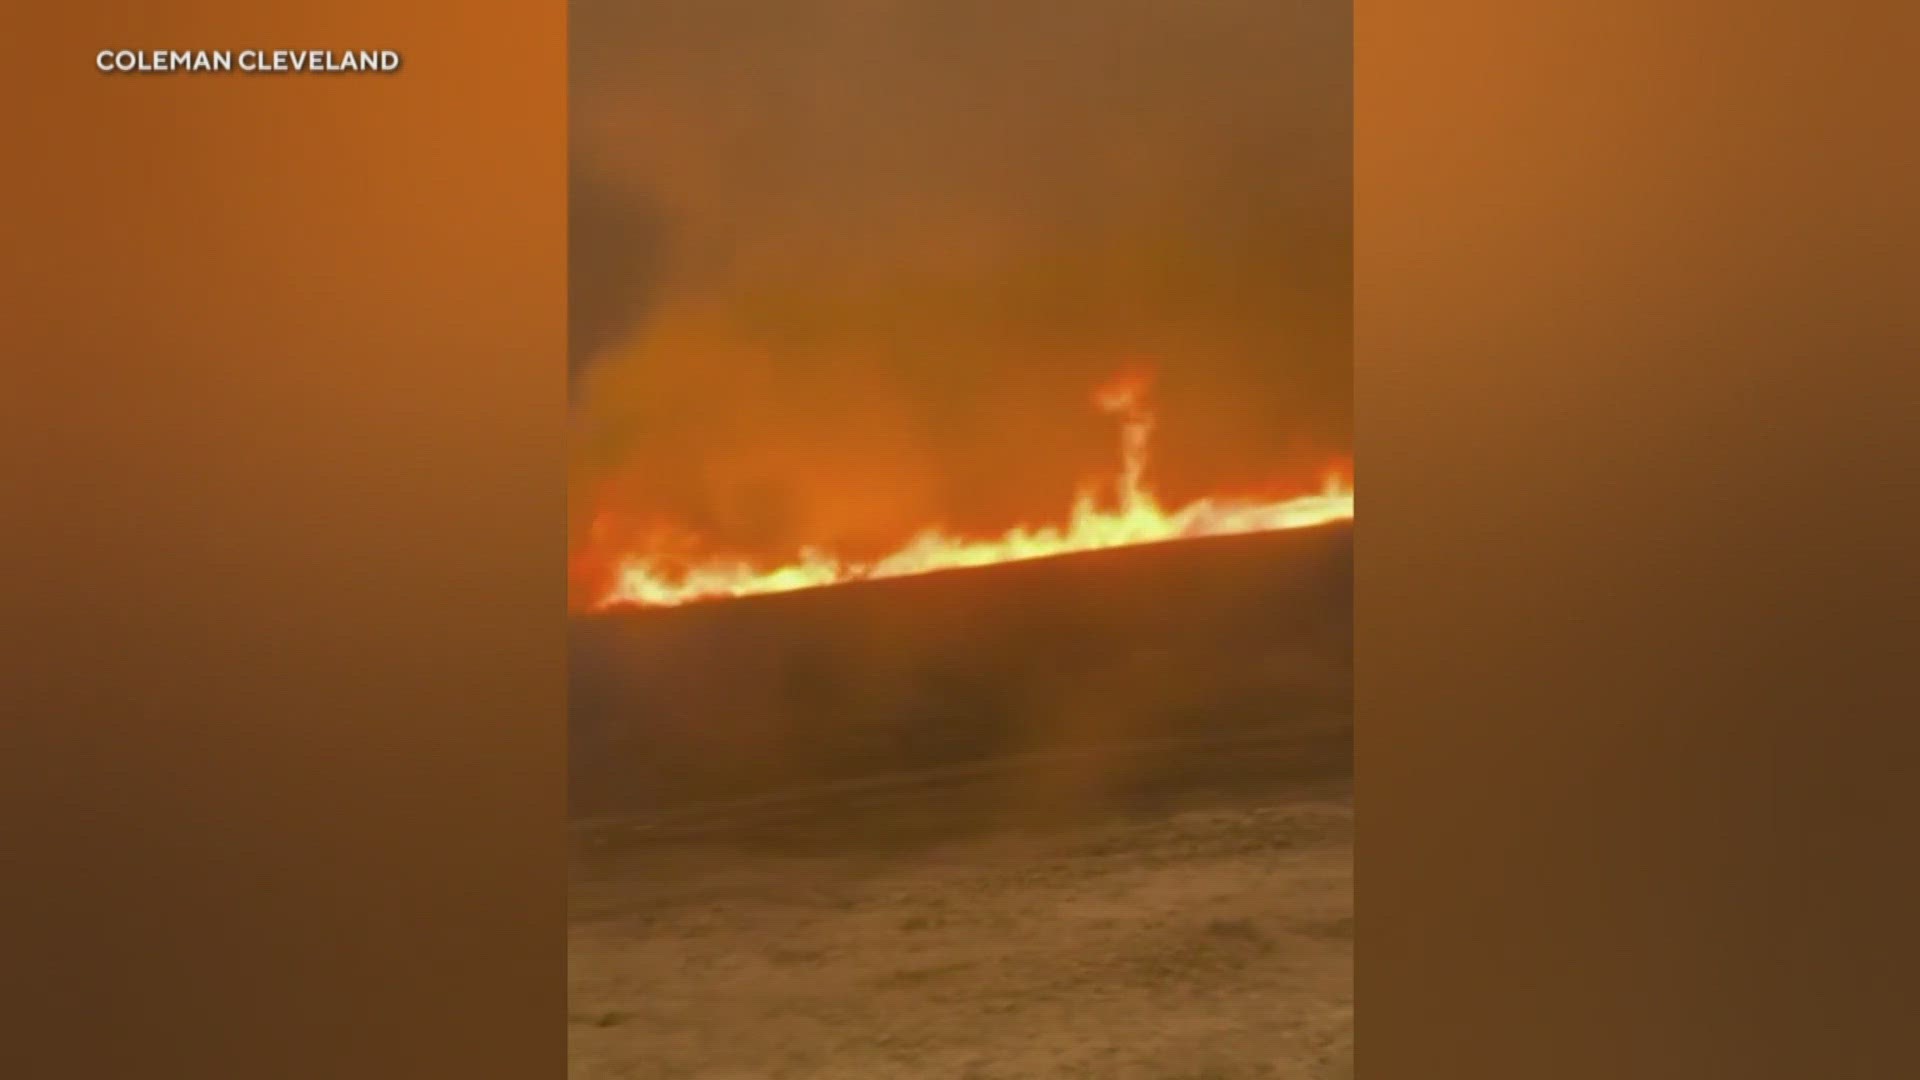 A new fire popped up in Hutchinson County last night, forcing evacuations of a nearby town.